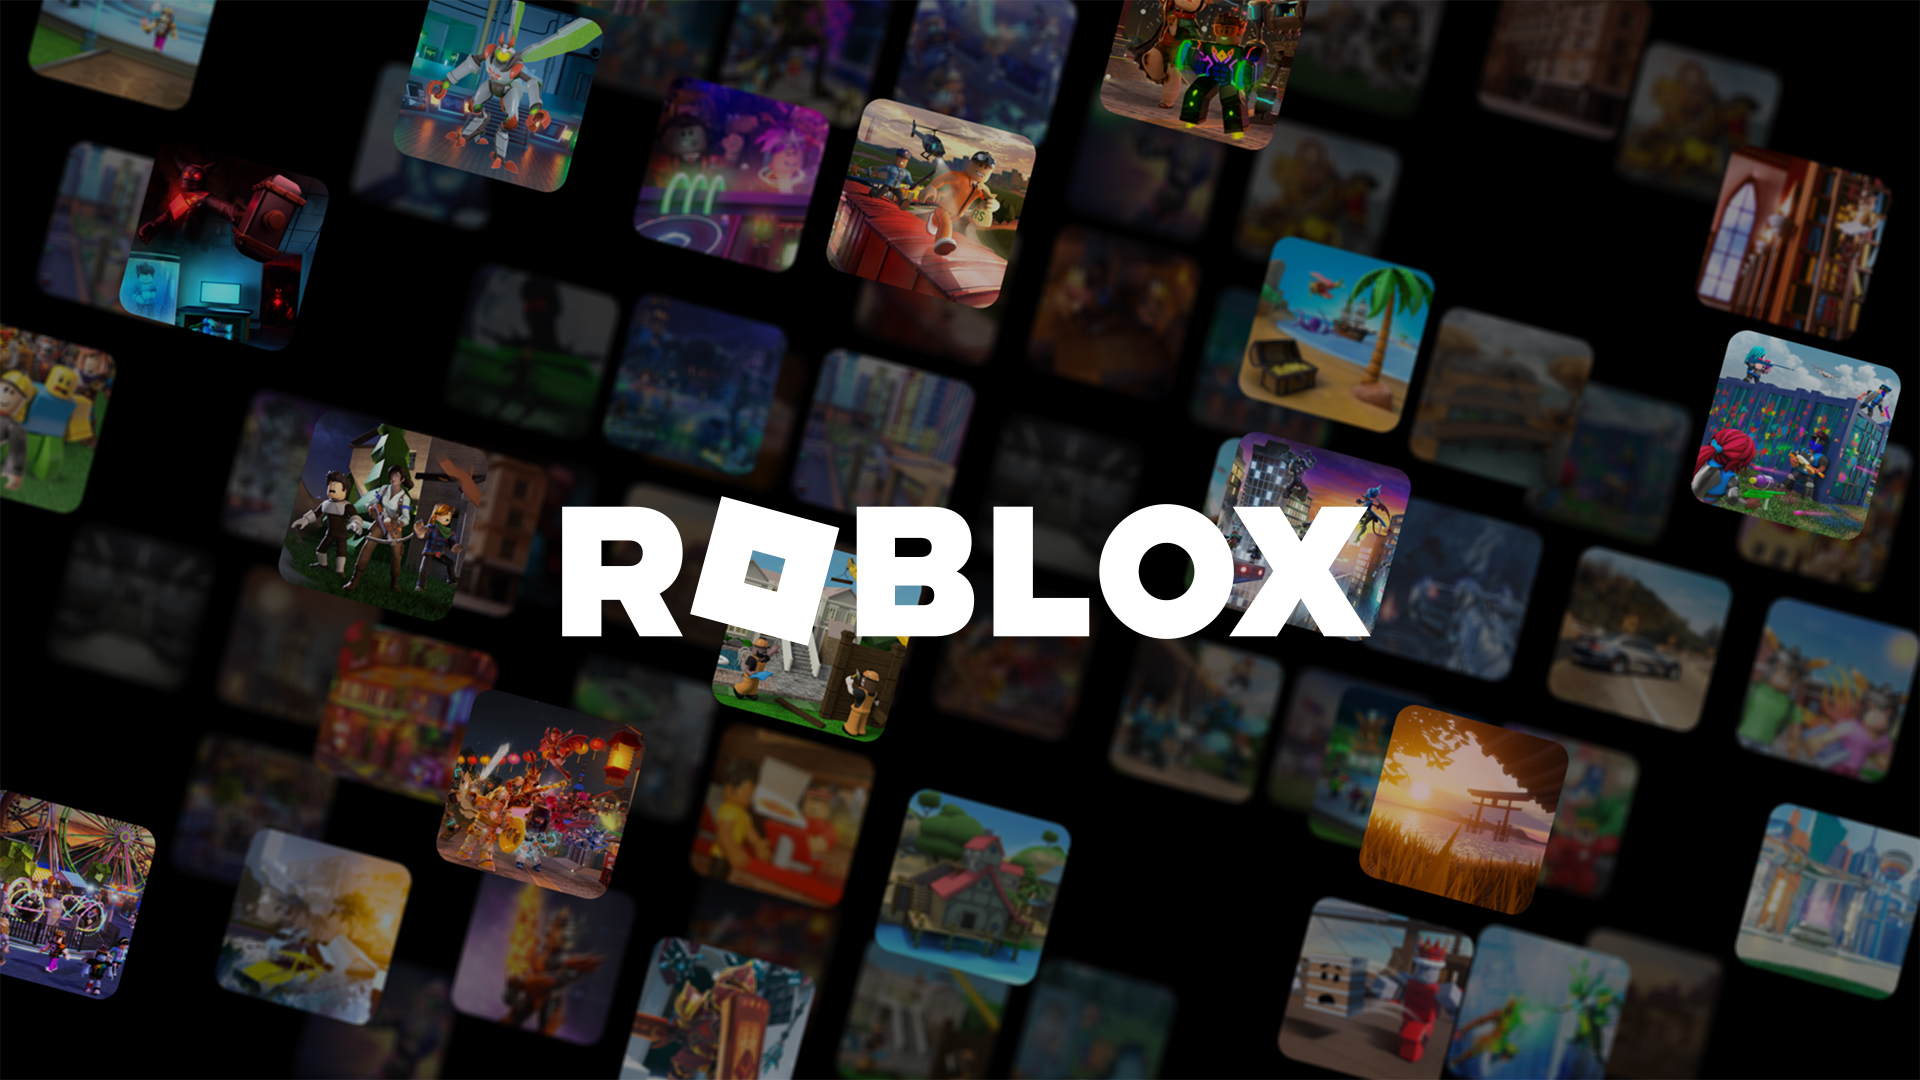 As Roblox has grown over the past 16+ years, so has the scale and complexity of the technical infrastructure that supports millions of immersive 3D co-experiences. The number of machines we support has more than tripled over the past two years, from approximately 36,000 as of June 30, 2021 to nearly 145,000 today.